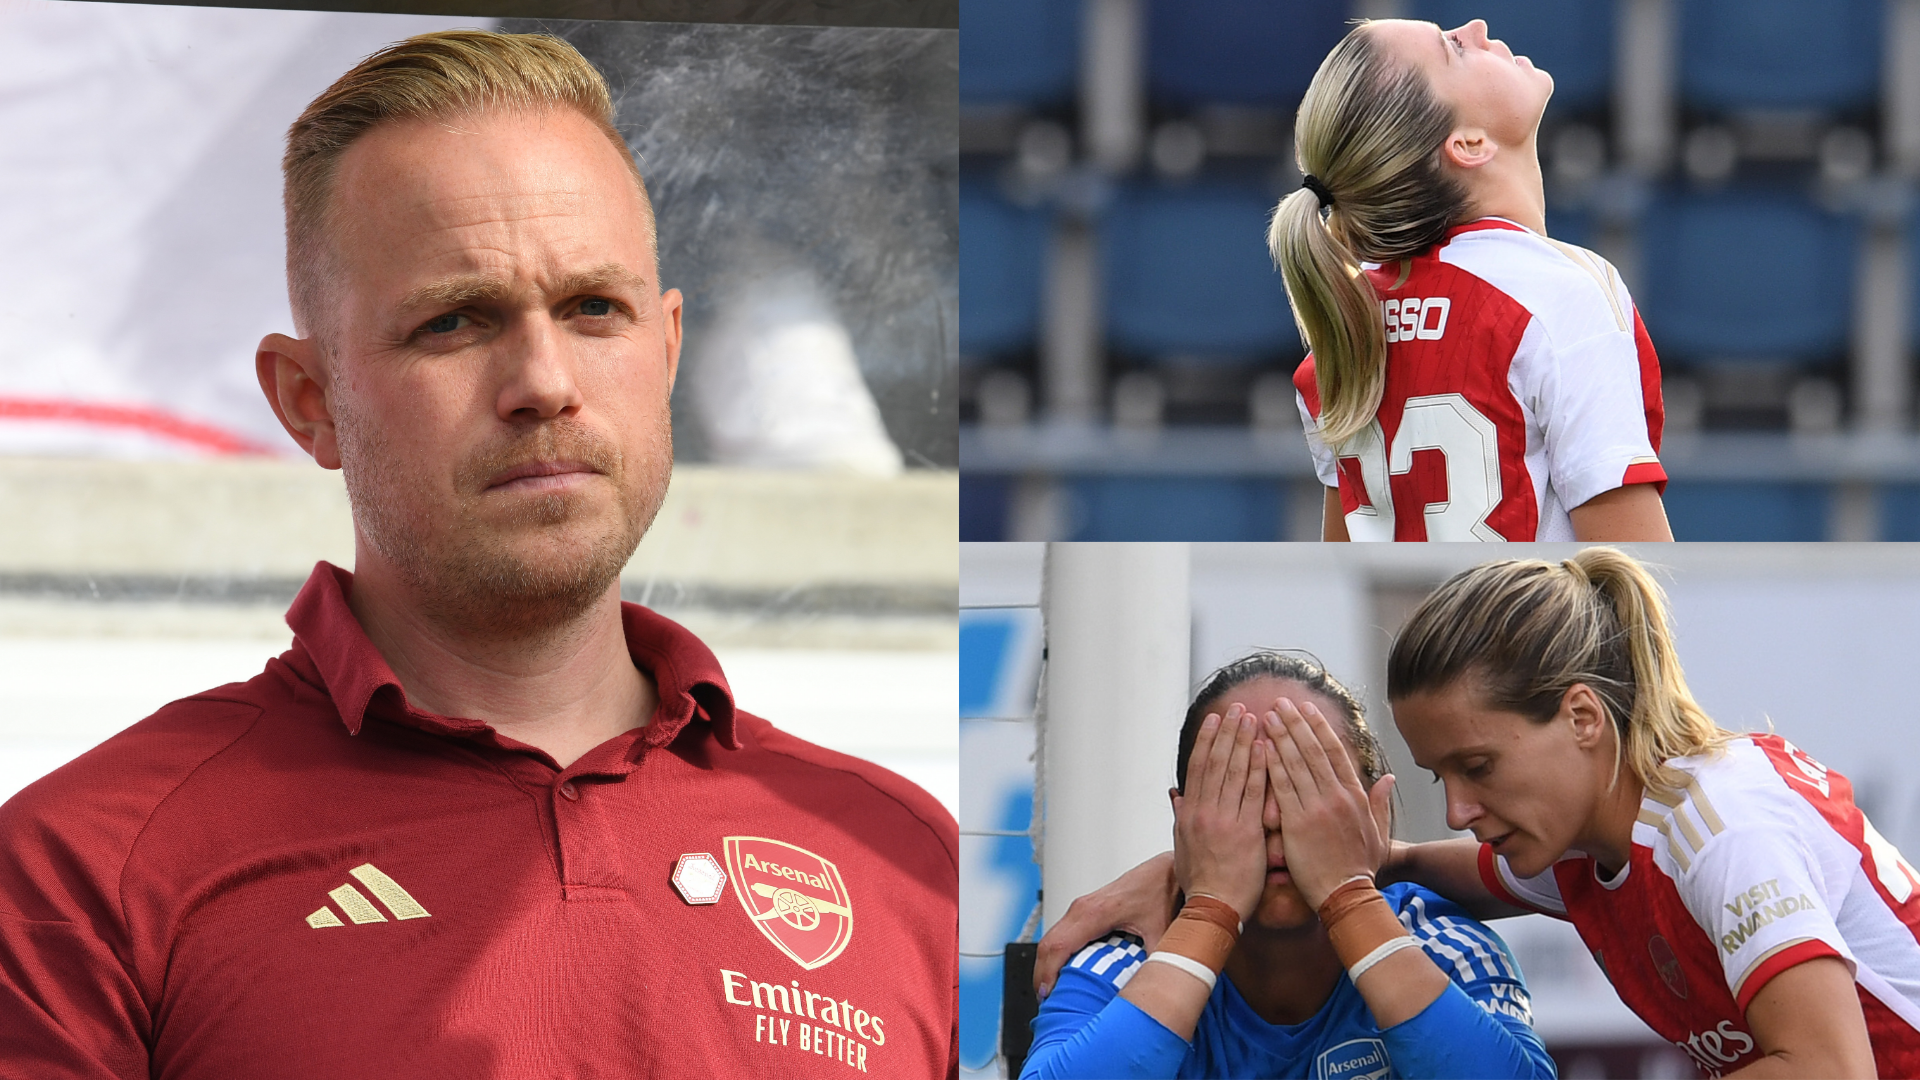 What Arsenal Women crashing out of Champions League means for